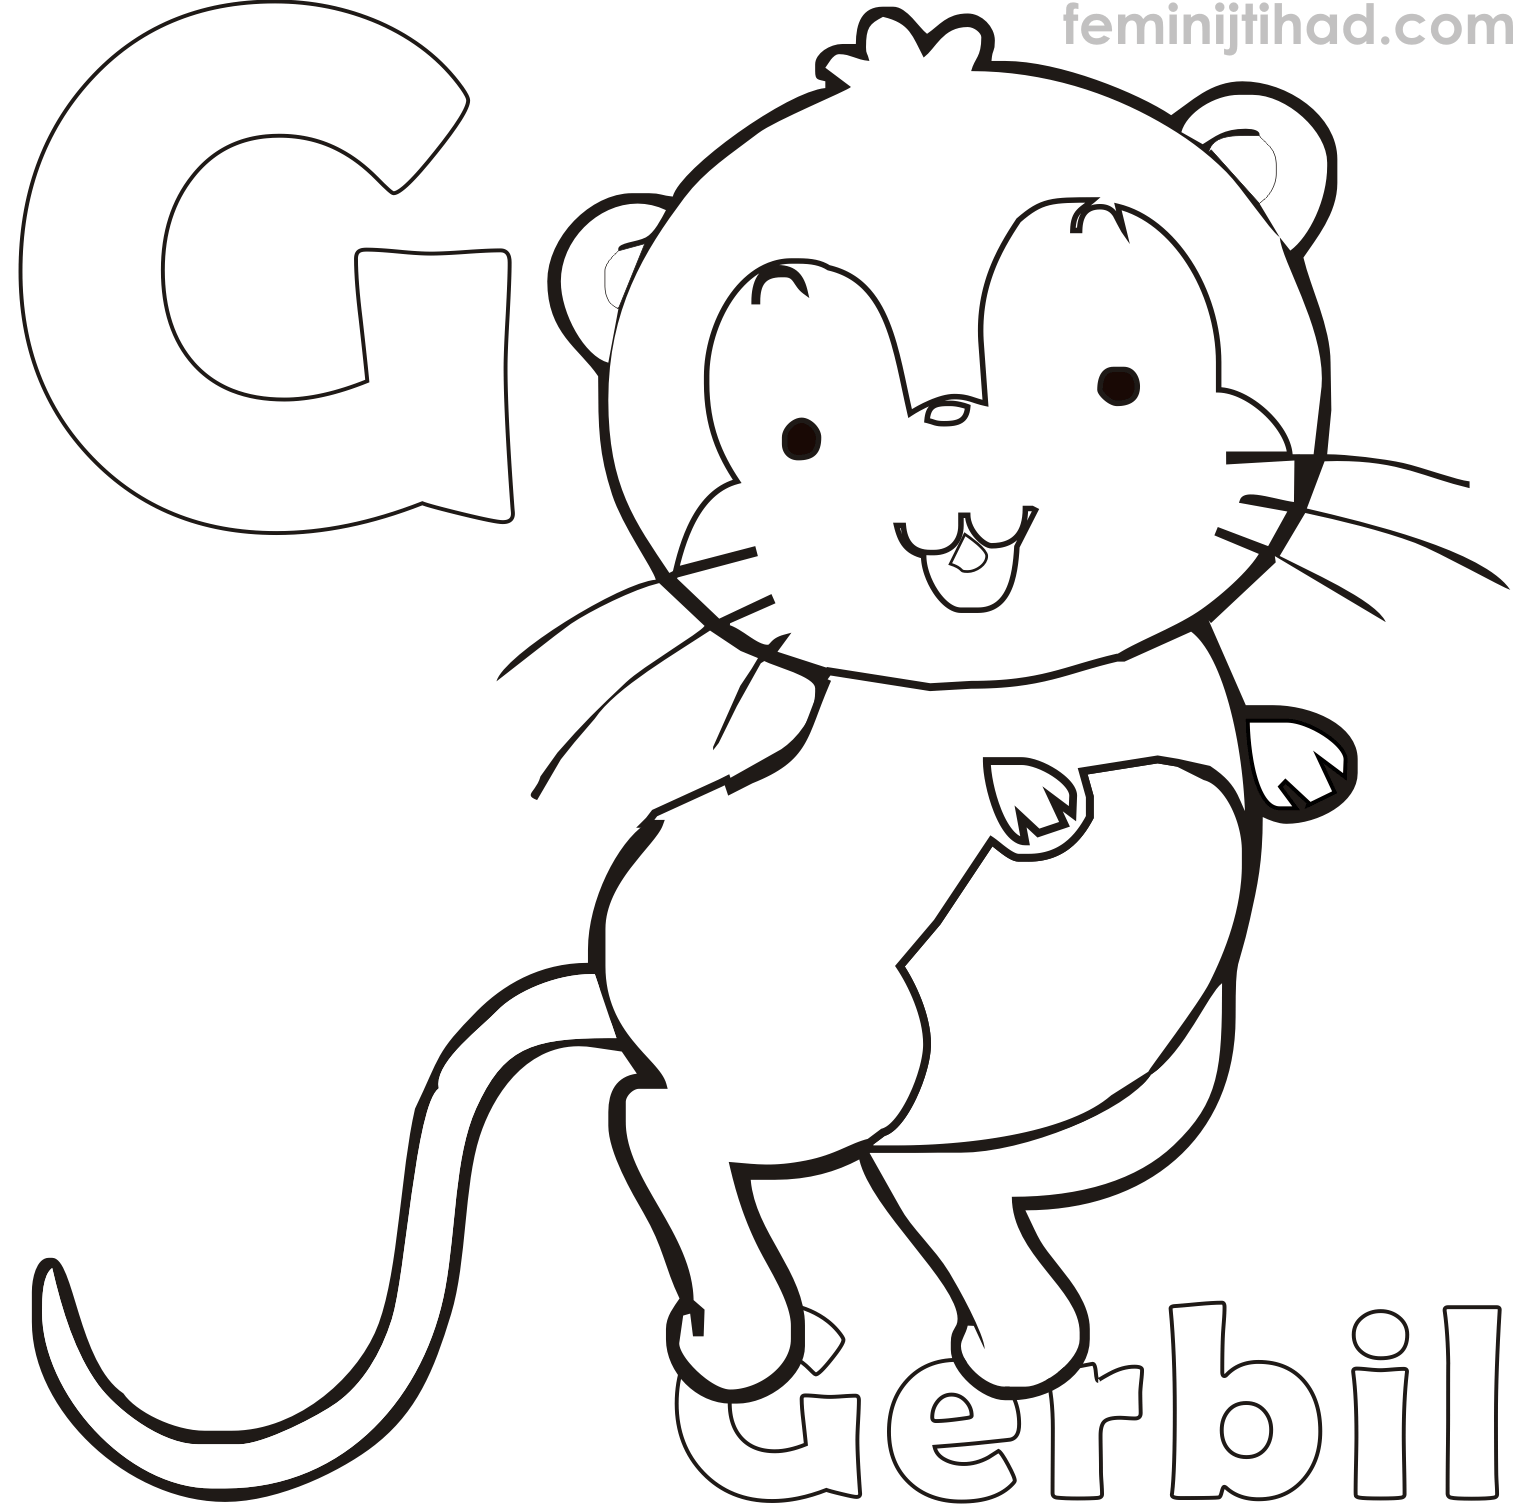 coloring page of a gerbil printable